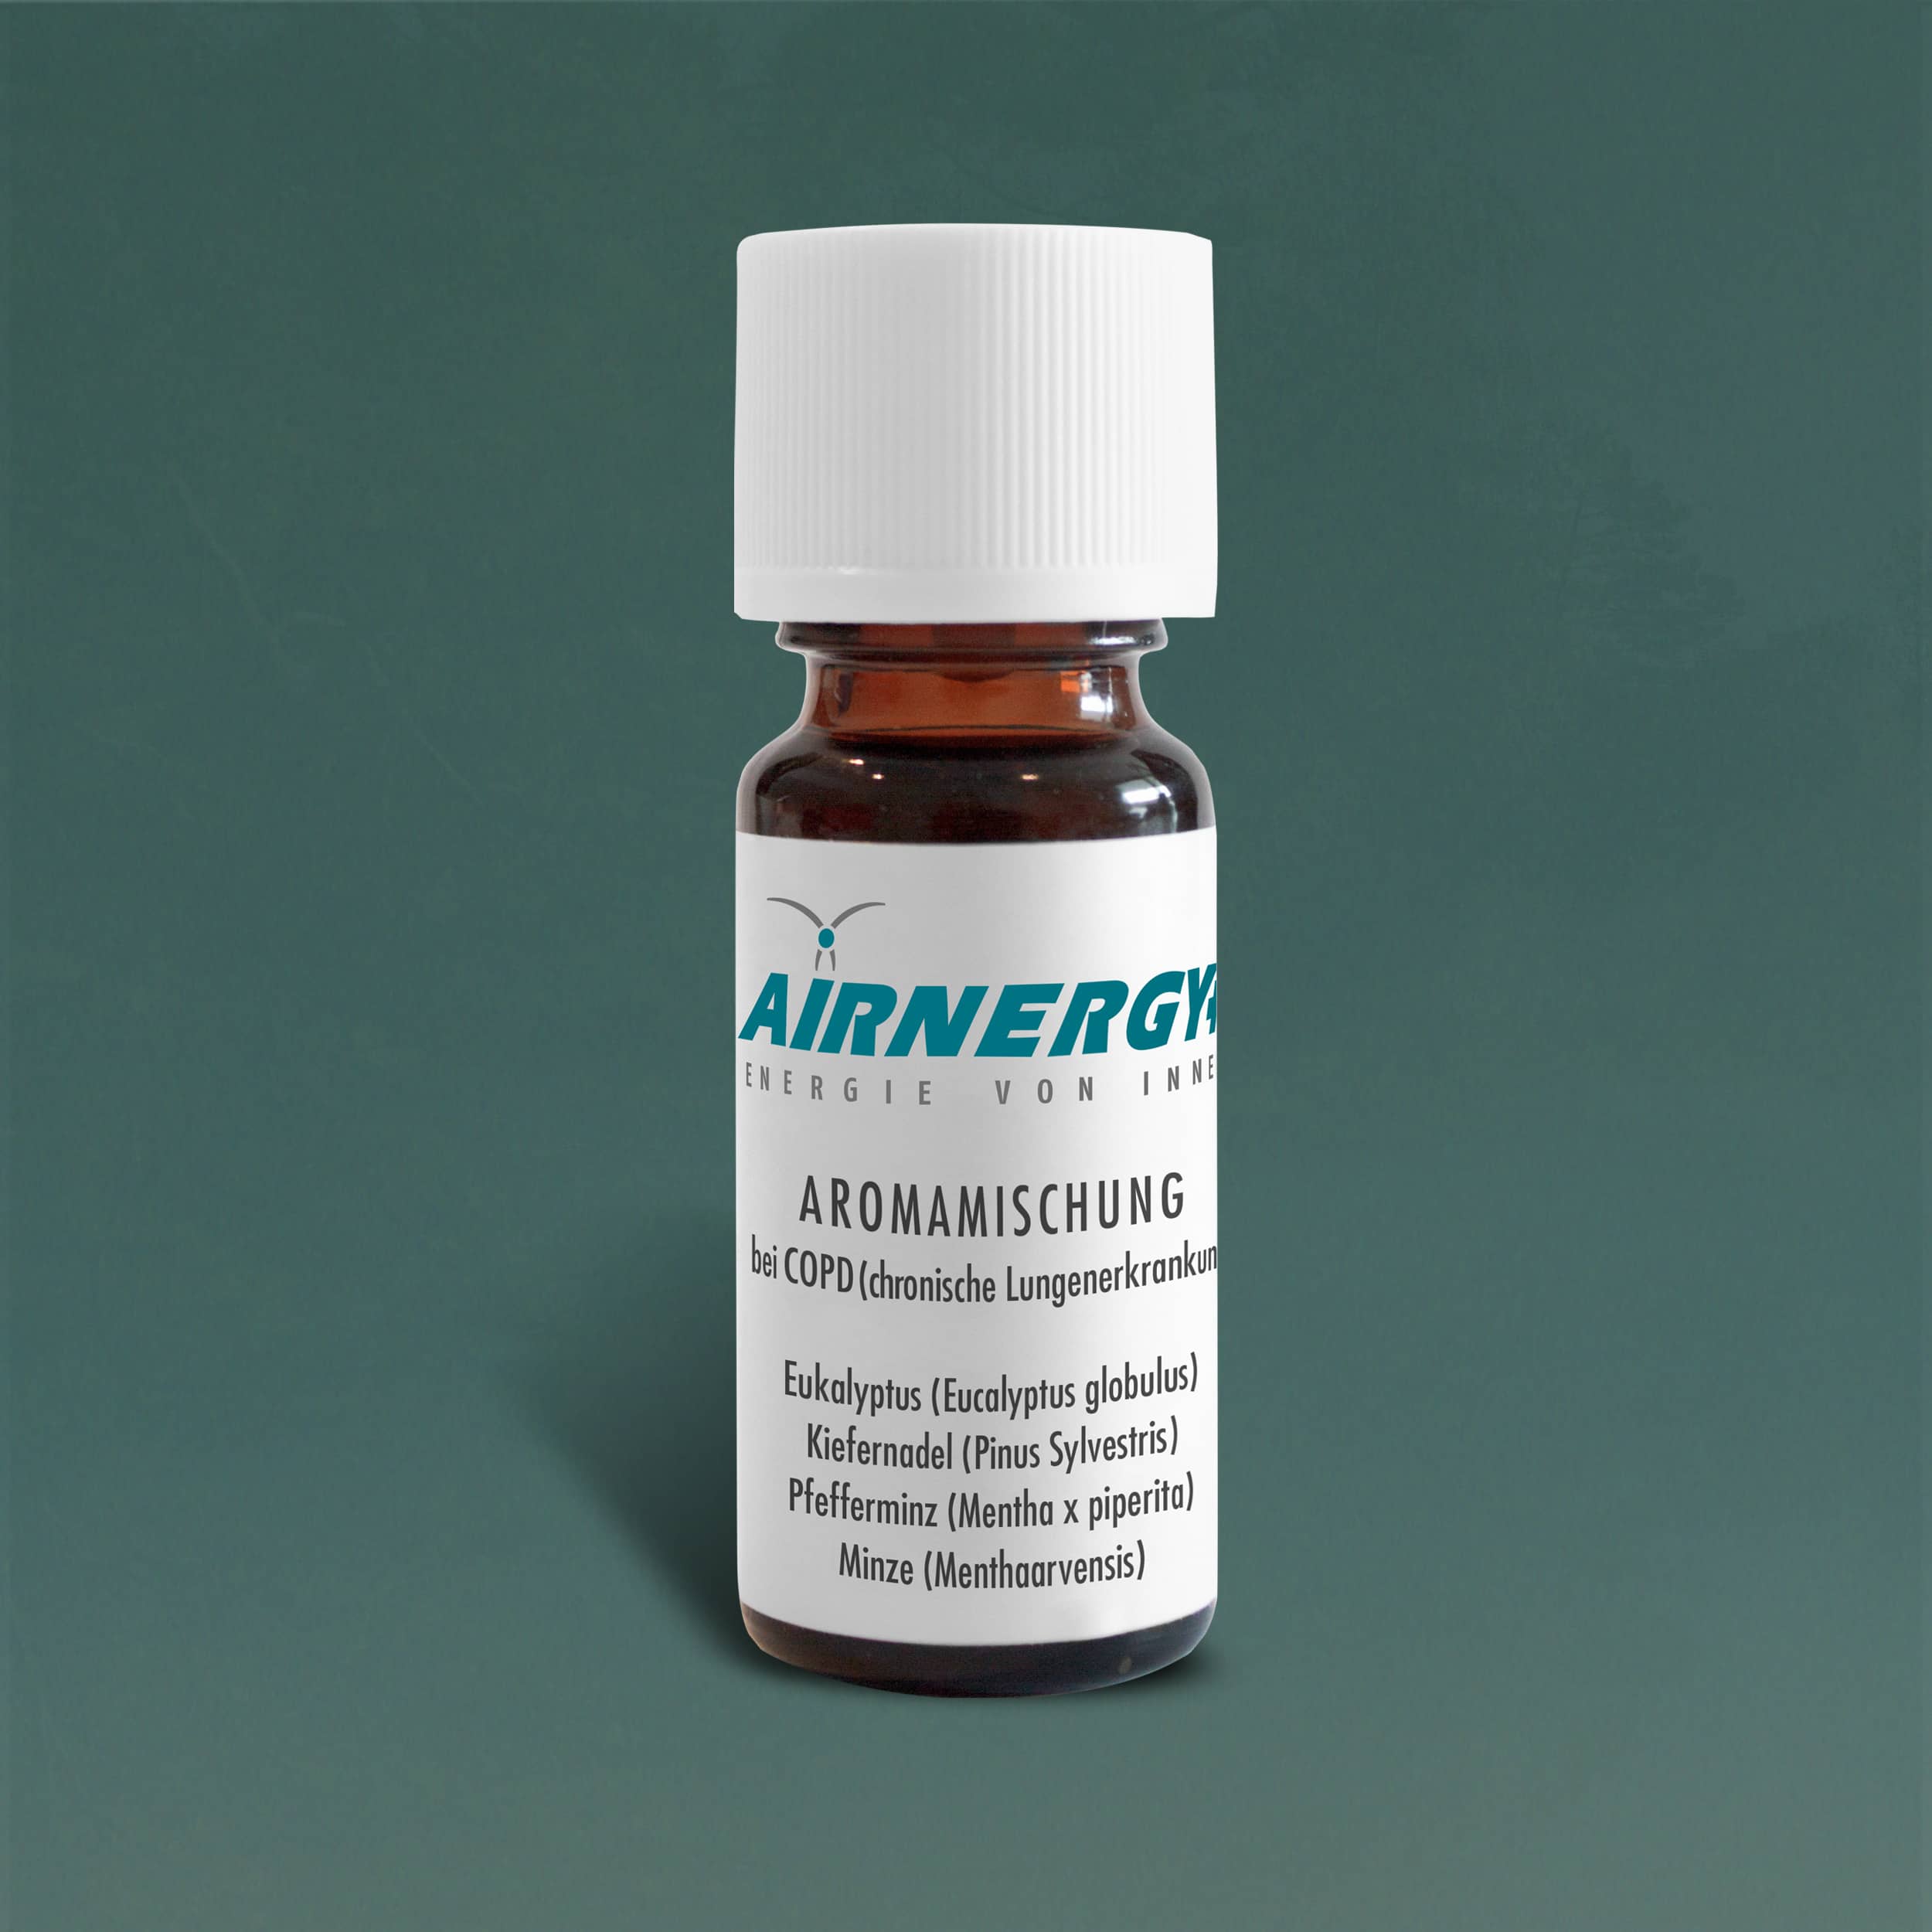 AIRNERGY Aroma Blend COPD Oil